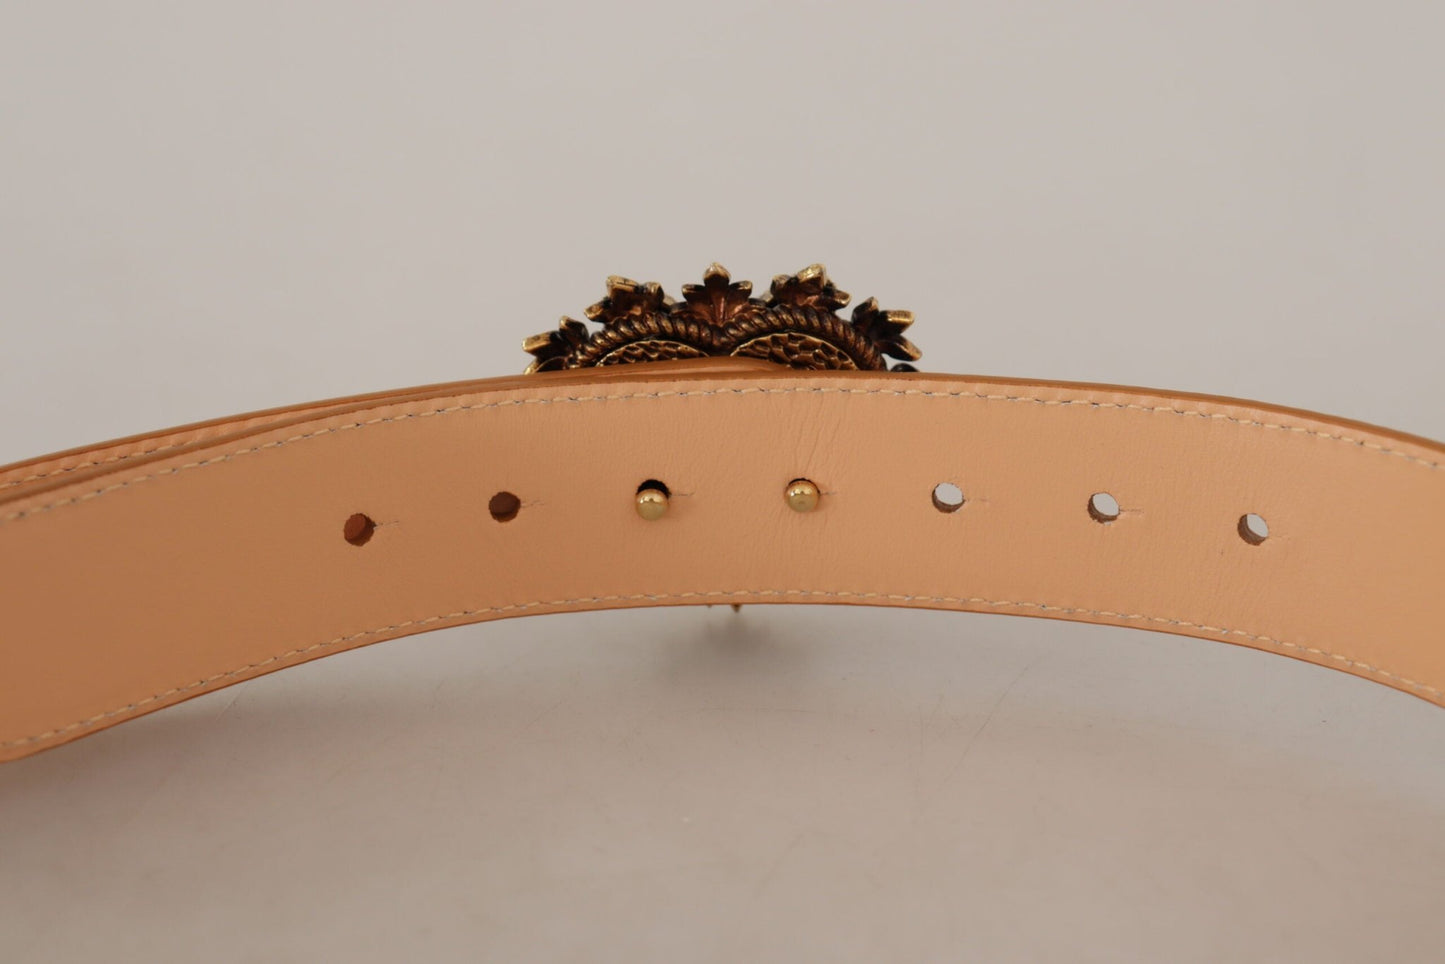 Dolce & Gabbana Enchanting Nude Leather Belt with Engraved Buckle